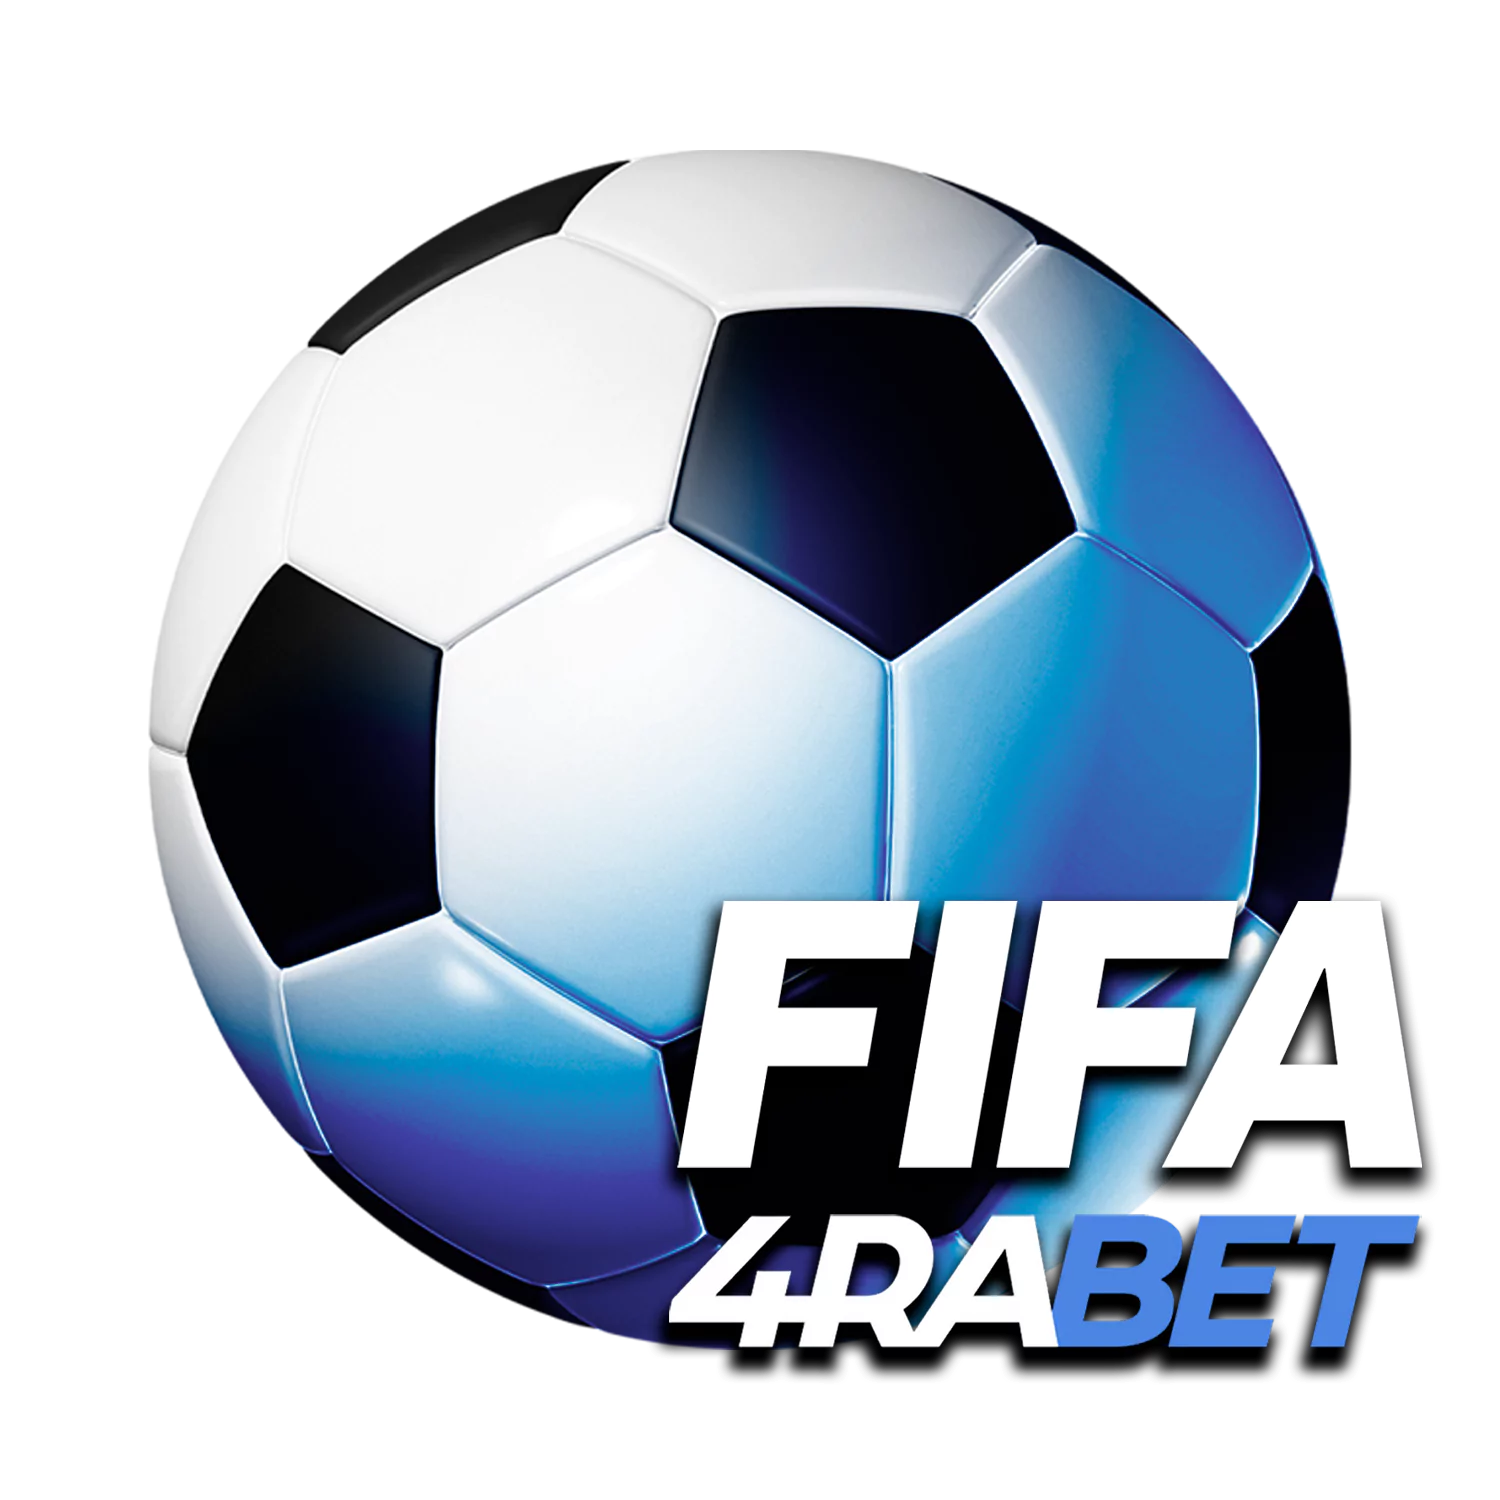 Learn how to bet on the FIFA matches at 4rabet.